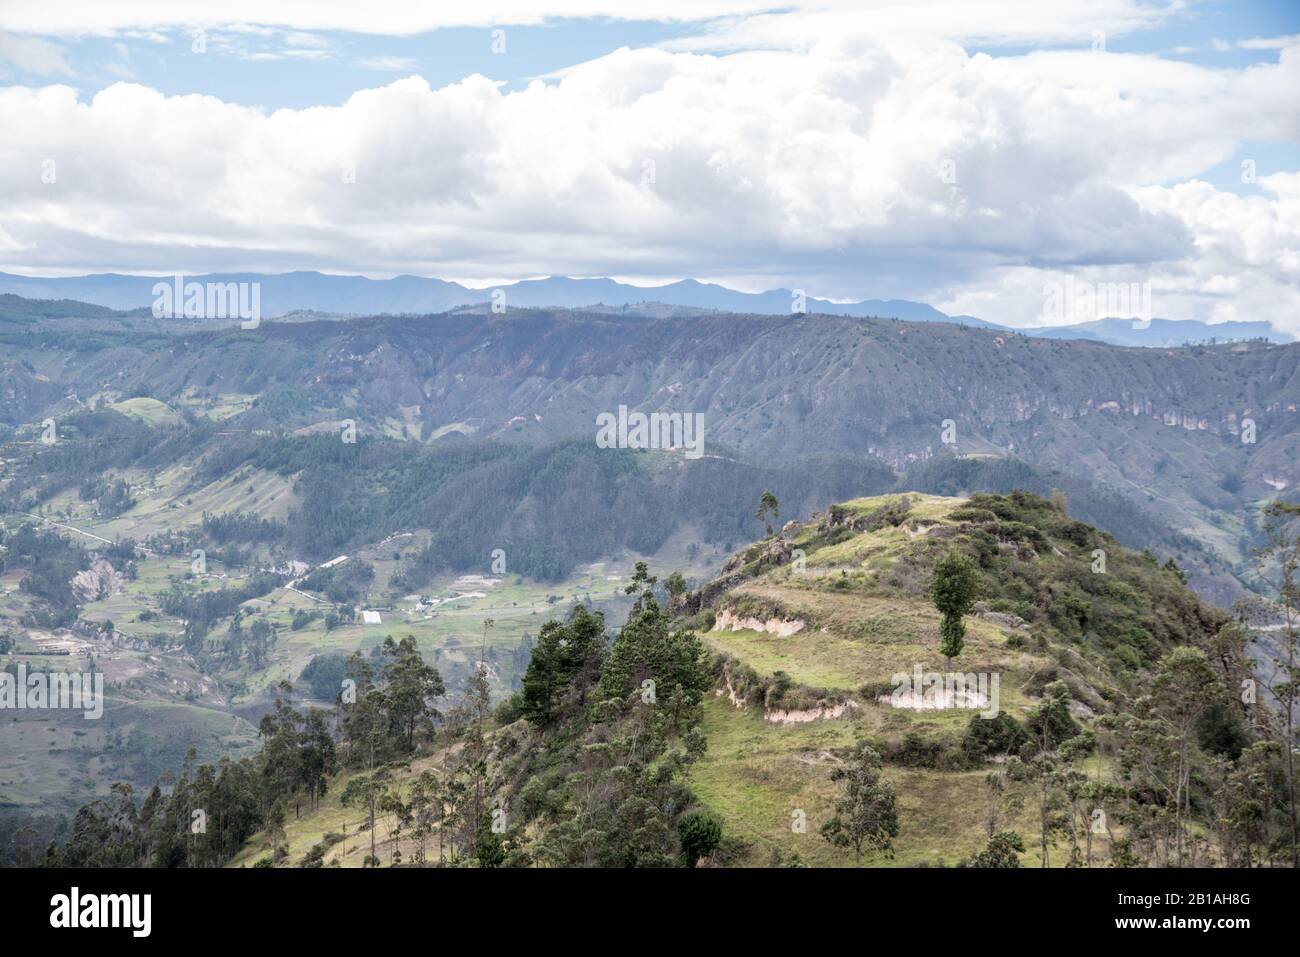 Views of a conjoined hillside from Leon Dormido (Sleeping Lion) just outside of Saraguro, Loja Province, Ecuador Stock Photo